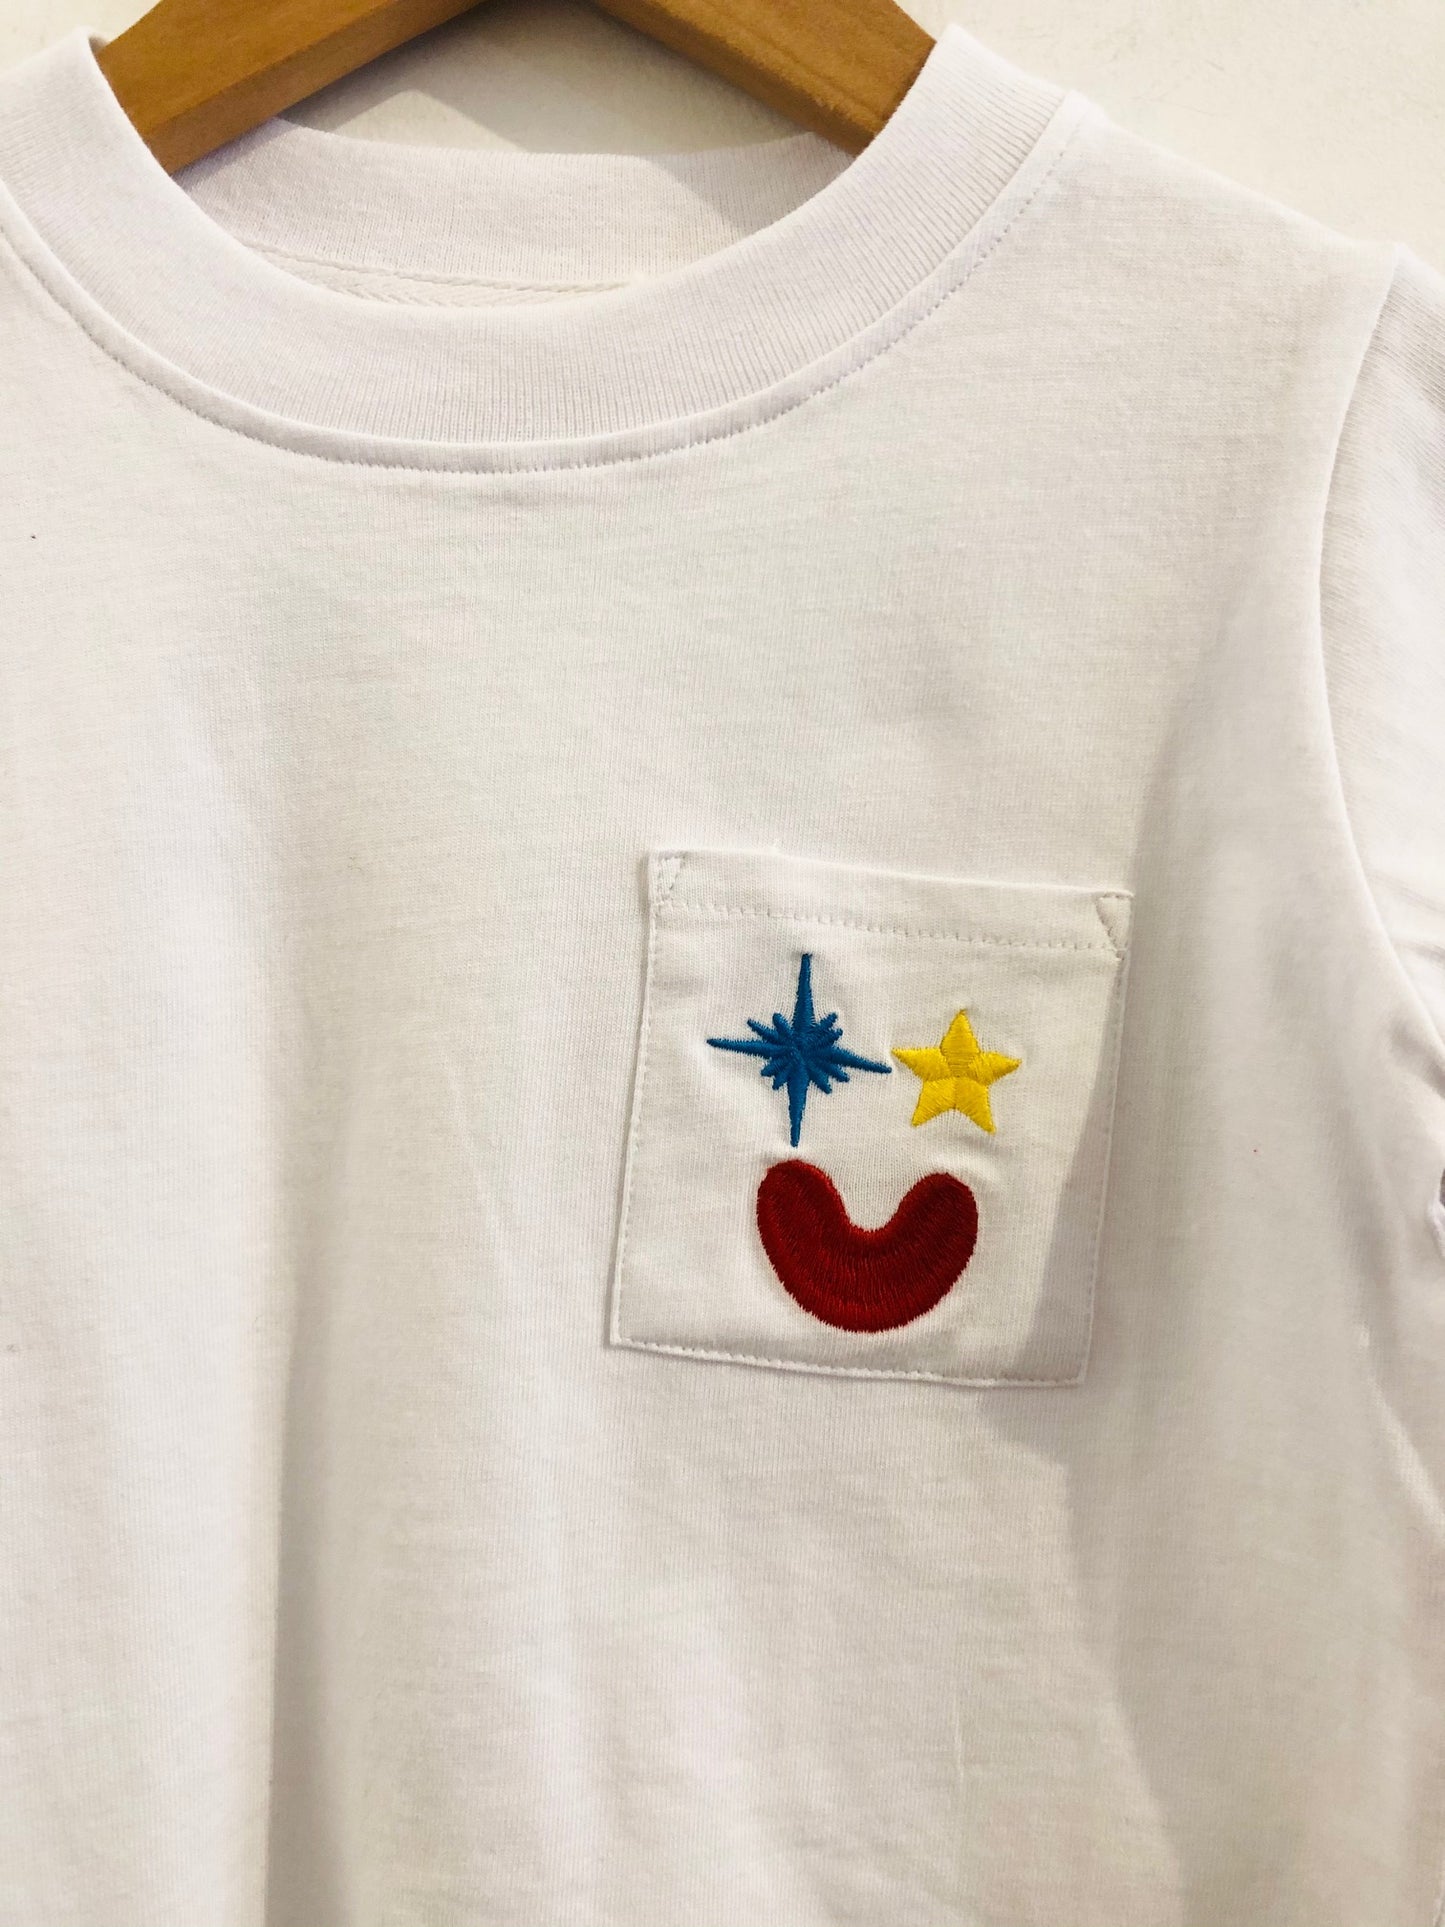 embroidered pocket tee / 2T